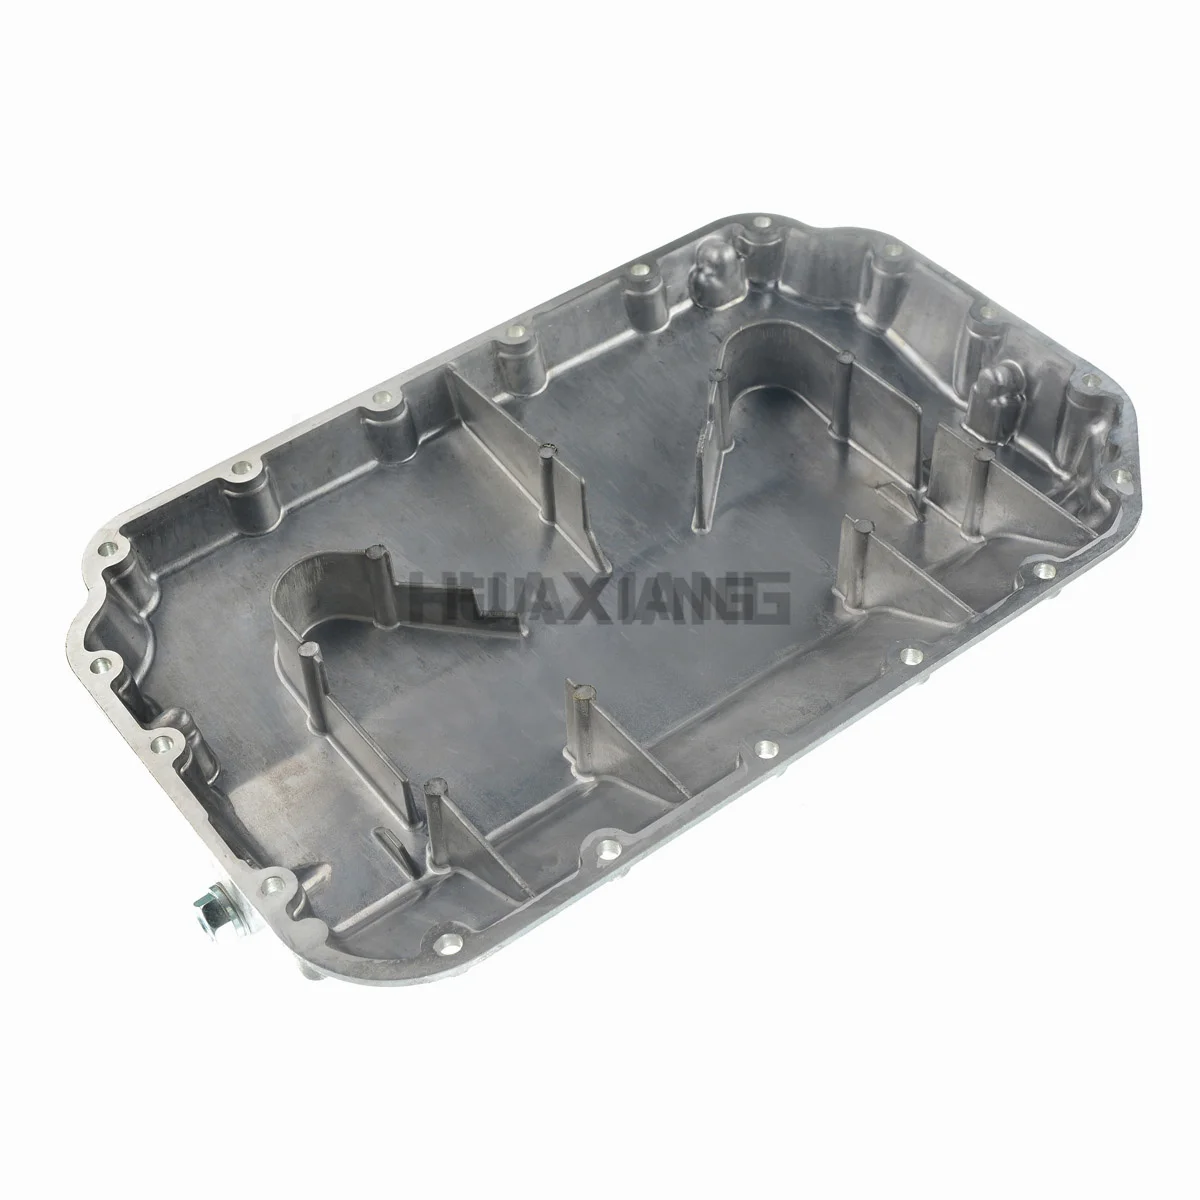 

In-stock CN US CA Lower Engine Oil Pan Sump for Audi 90 Quattro A6 Quattro Cabriolet V6 2.8L 94-98 VWP28A